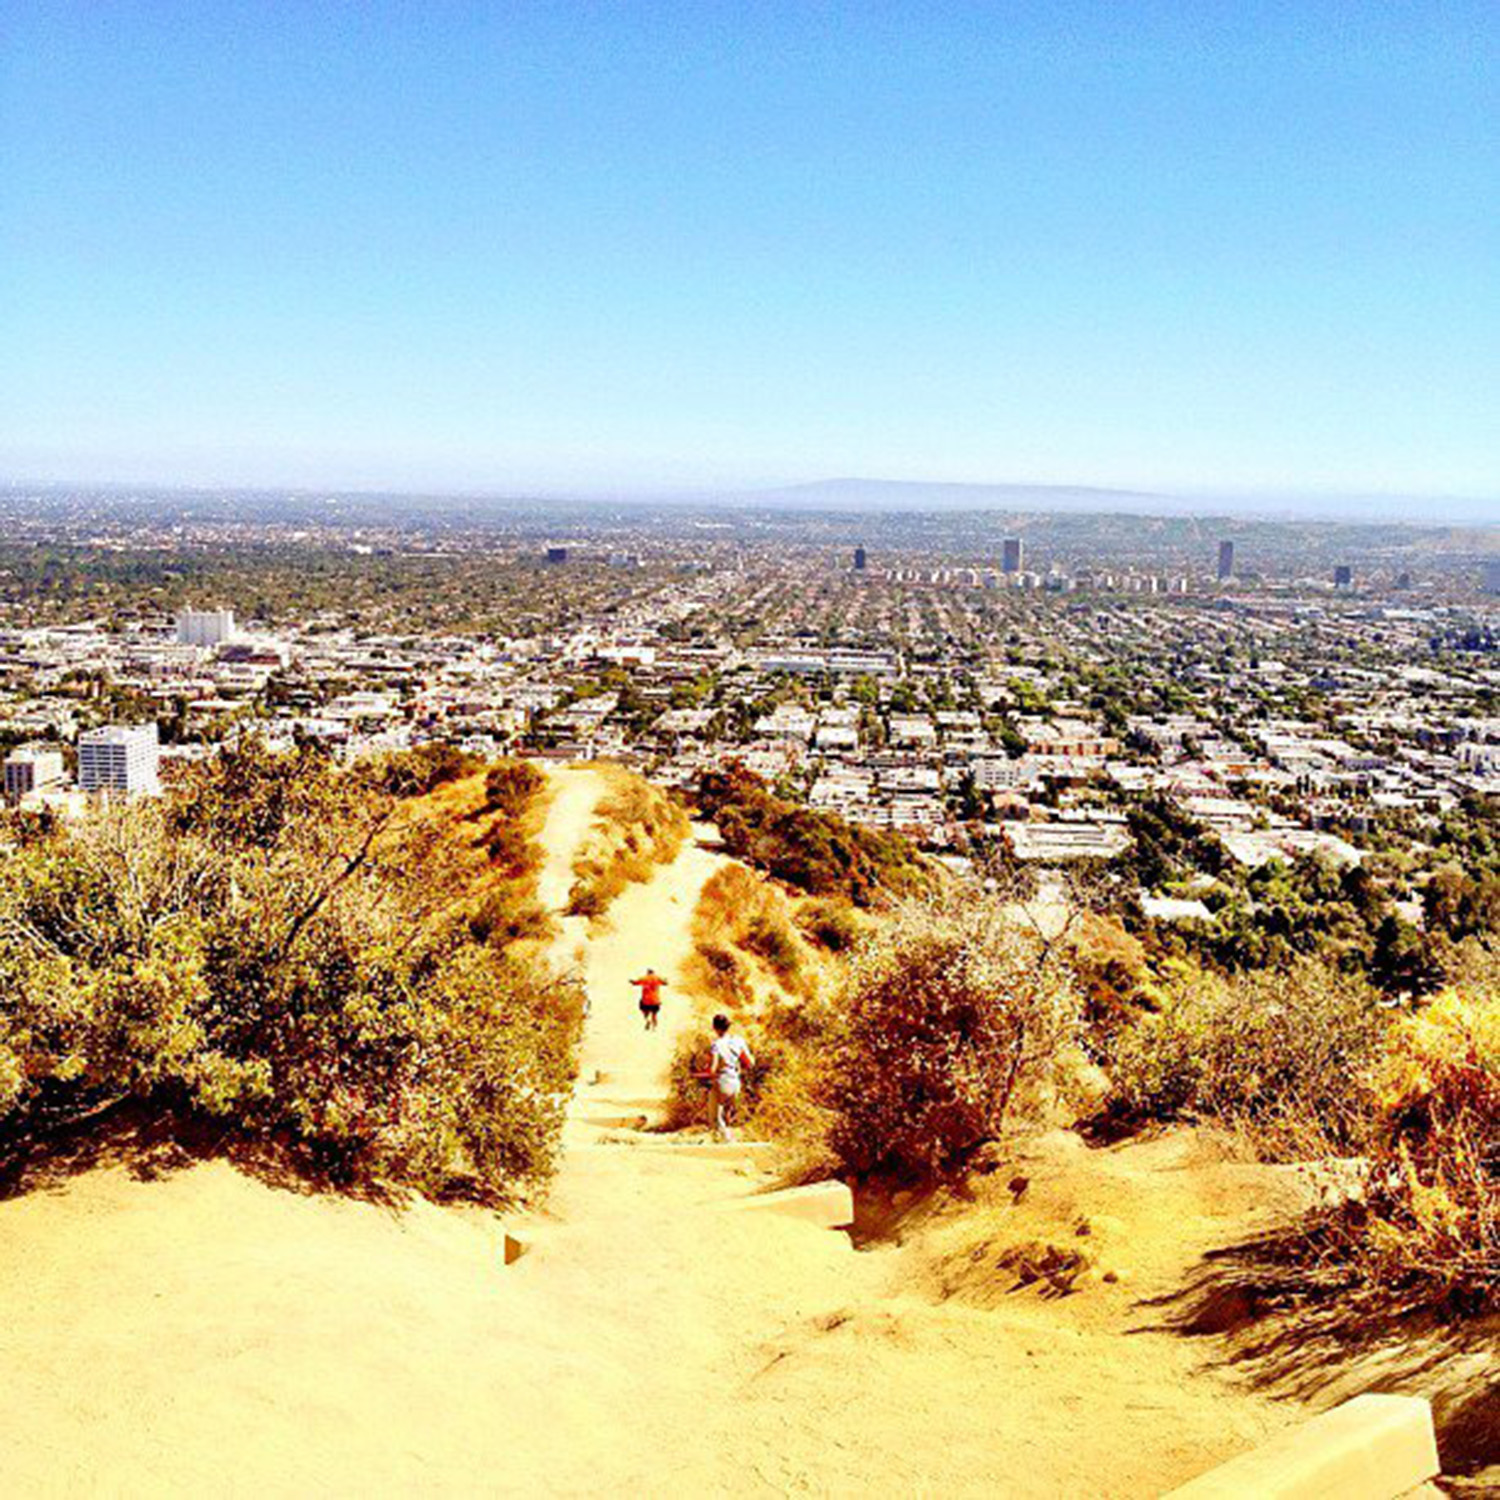 The view of LA from the top of Runyon Canyon 